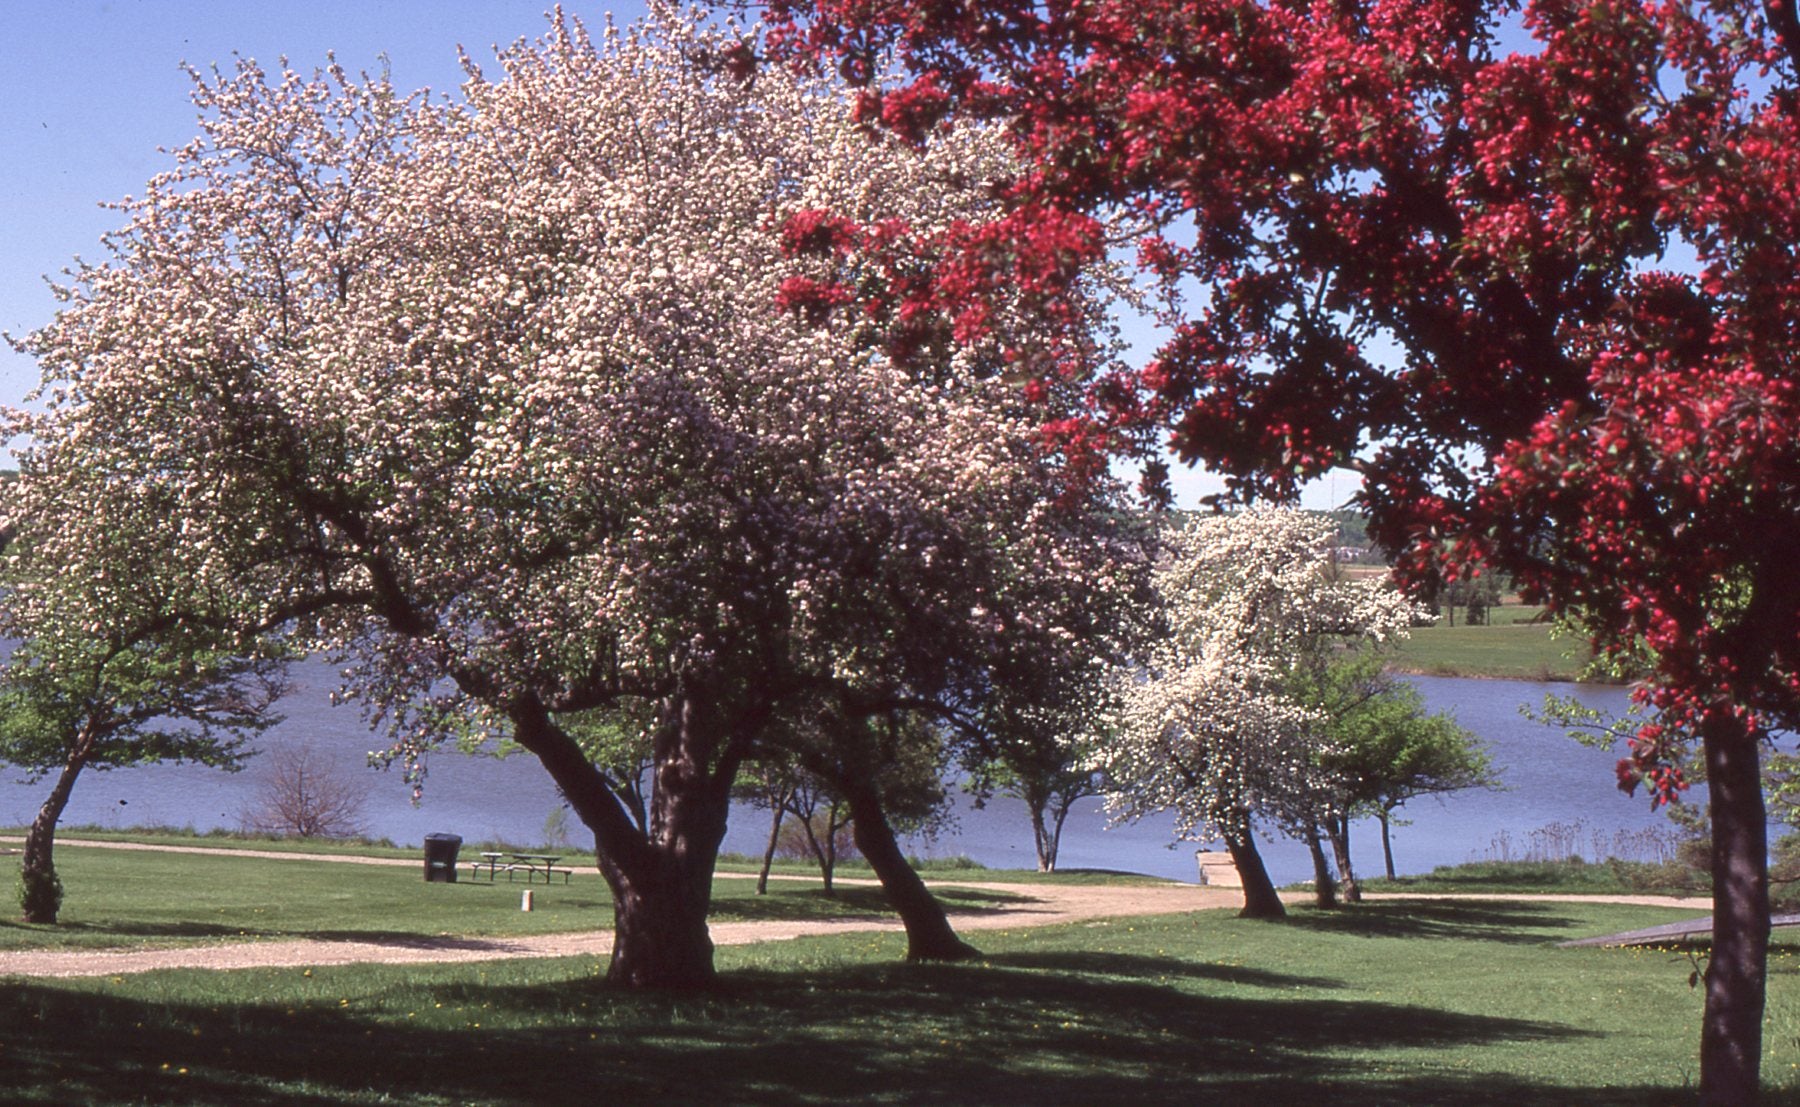 Trees in bloom, colombia lake in the background